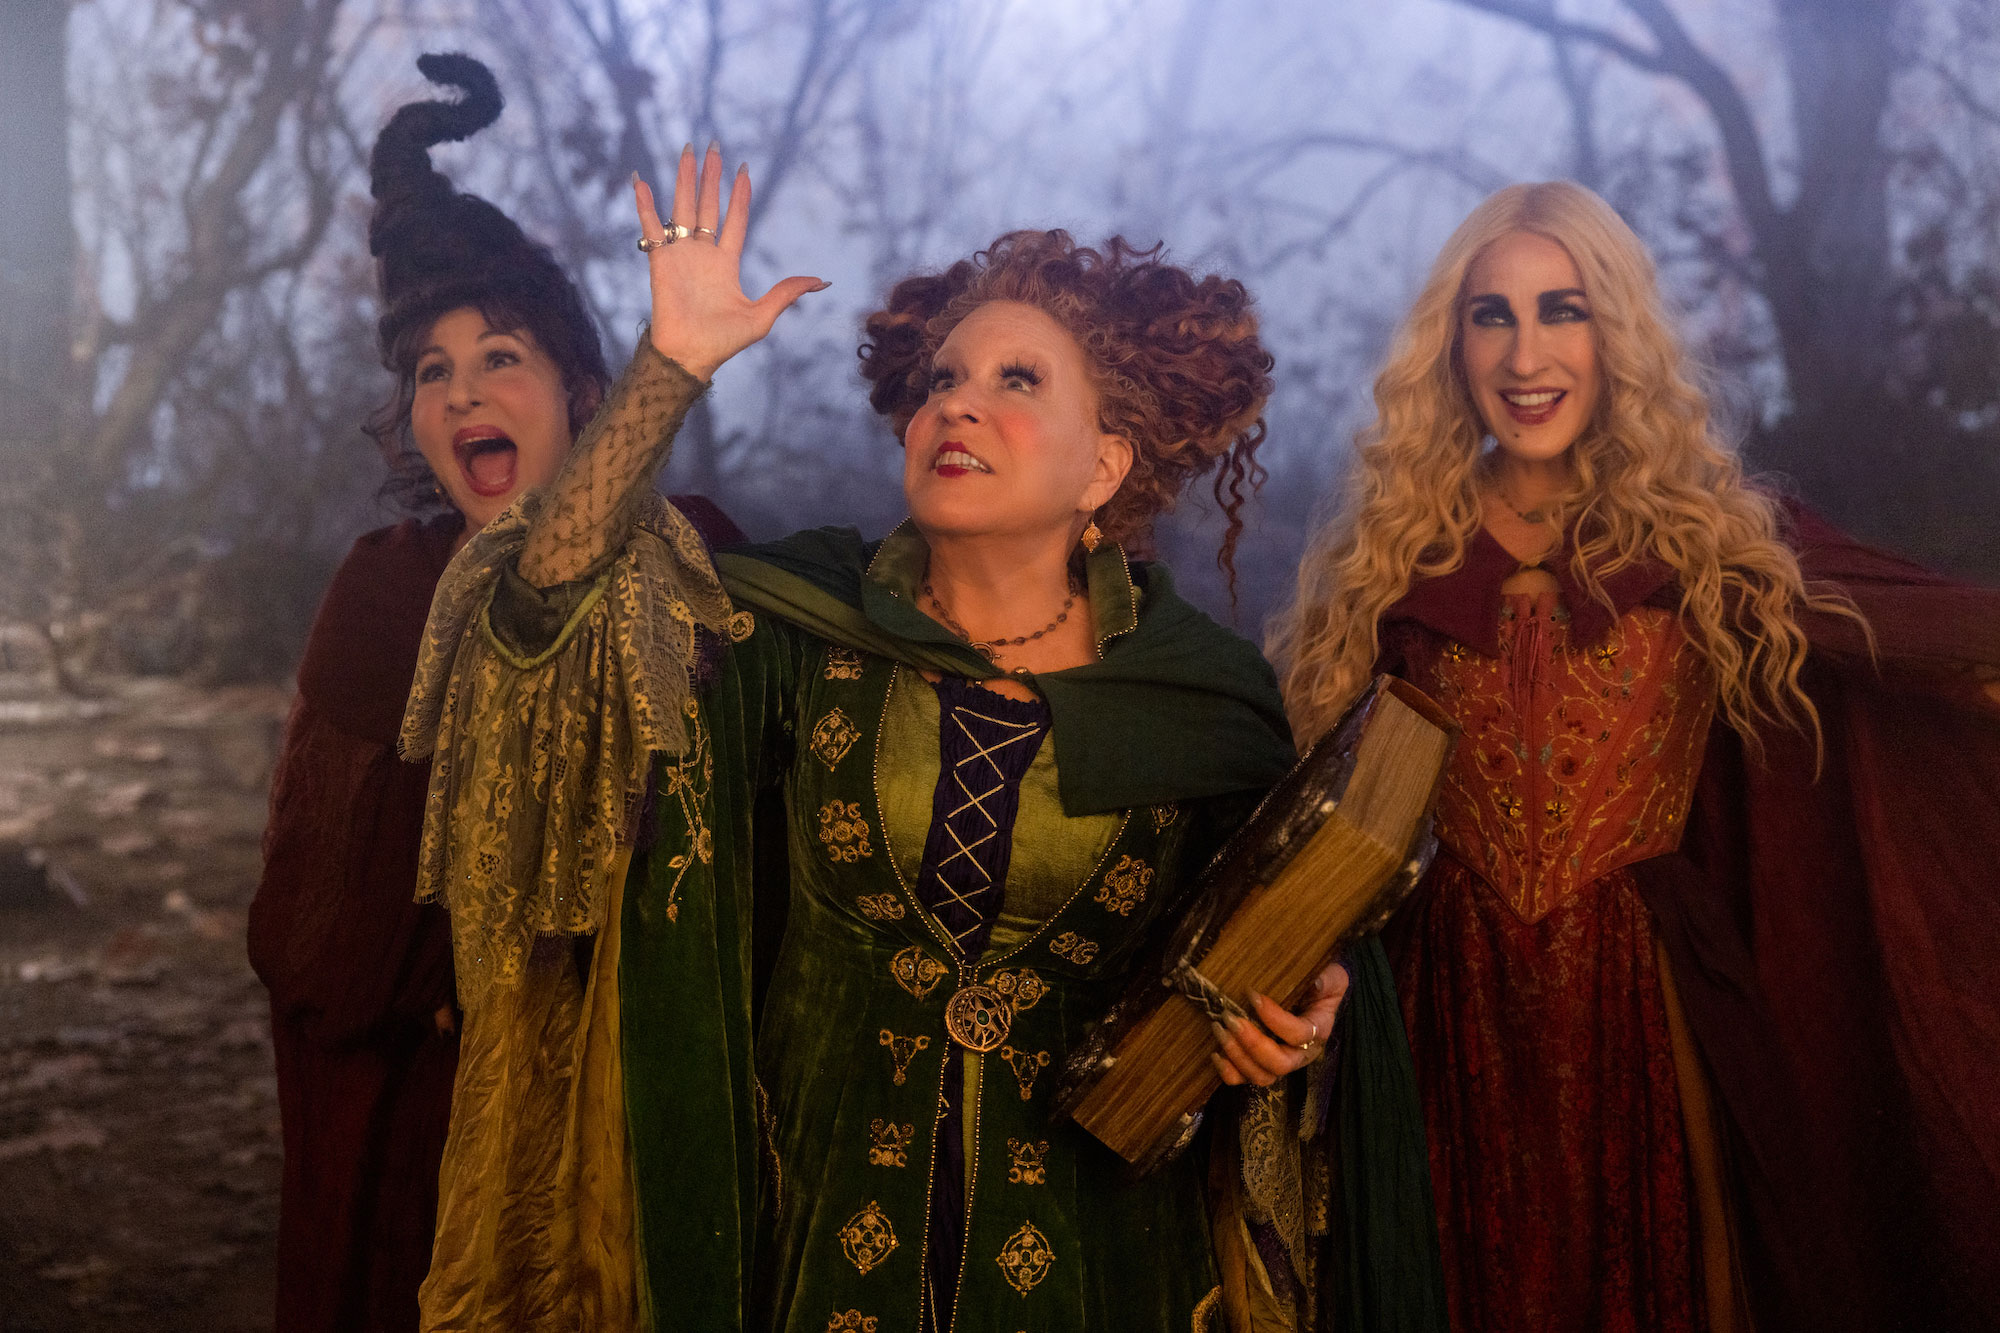 Movie still of witches from Hocus Pocus 2